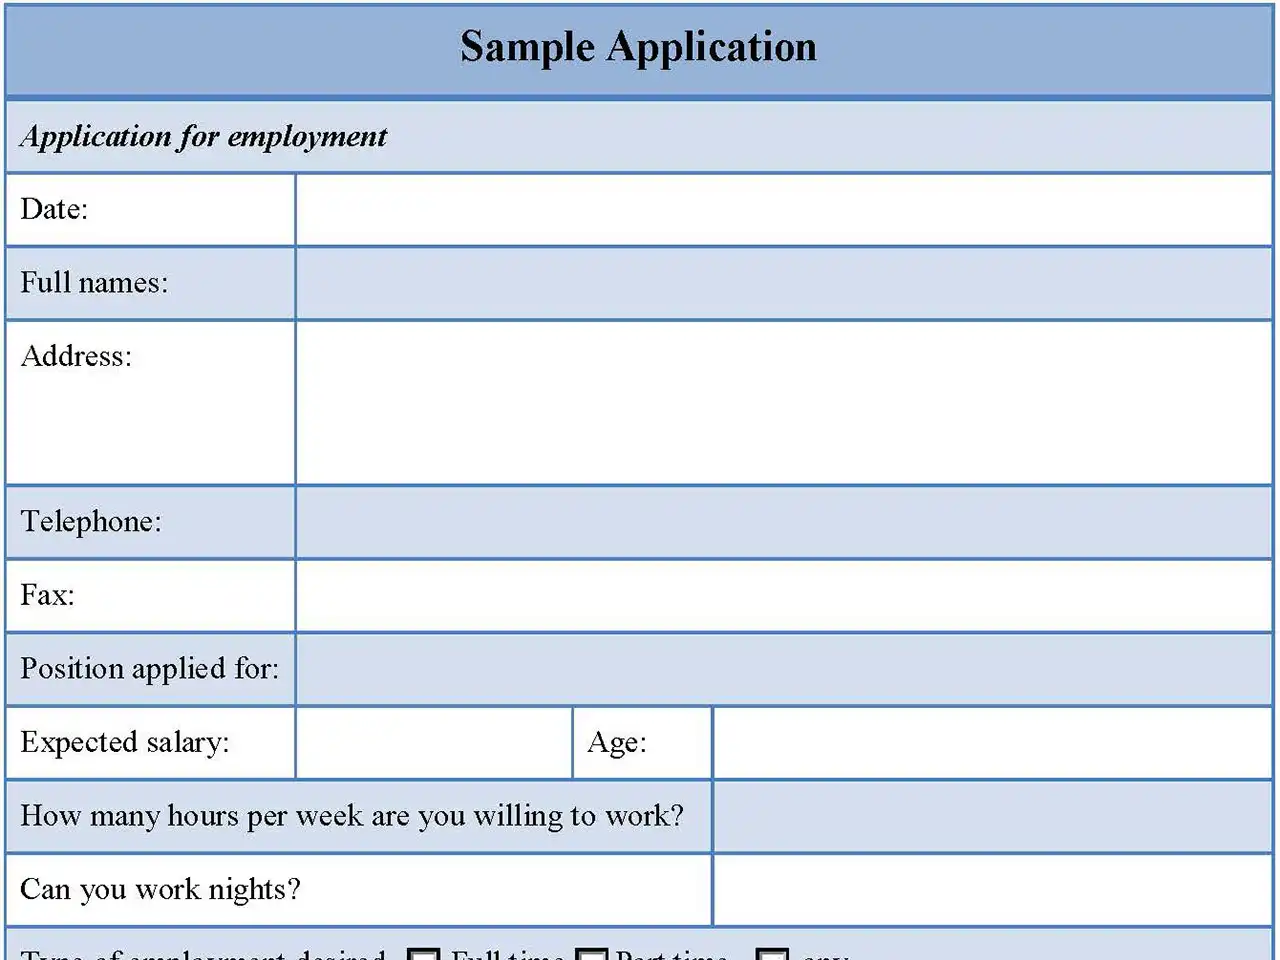 Sample Application Forms